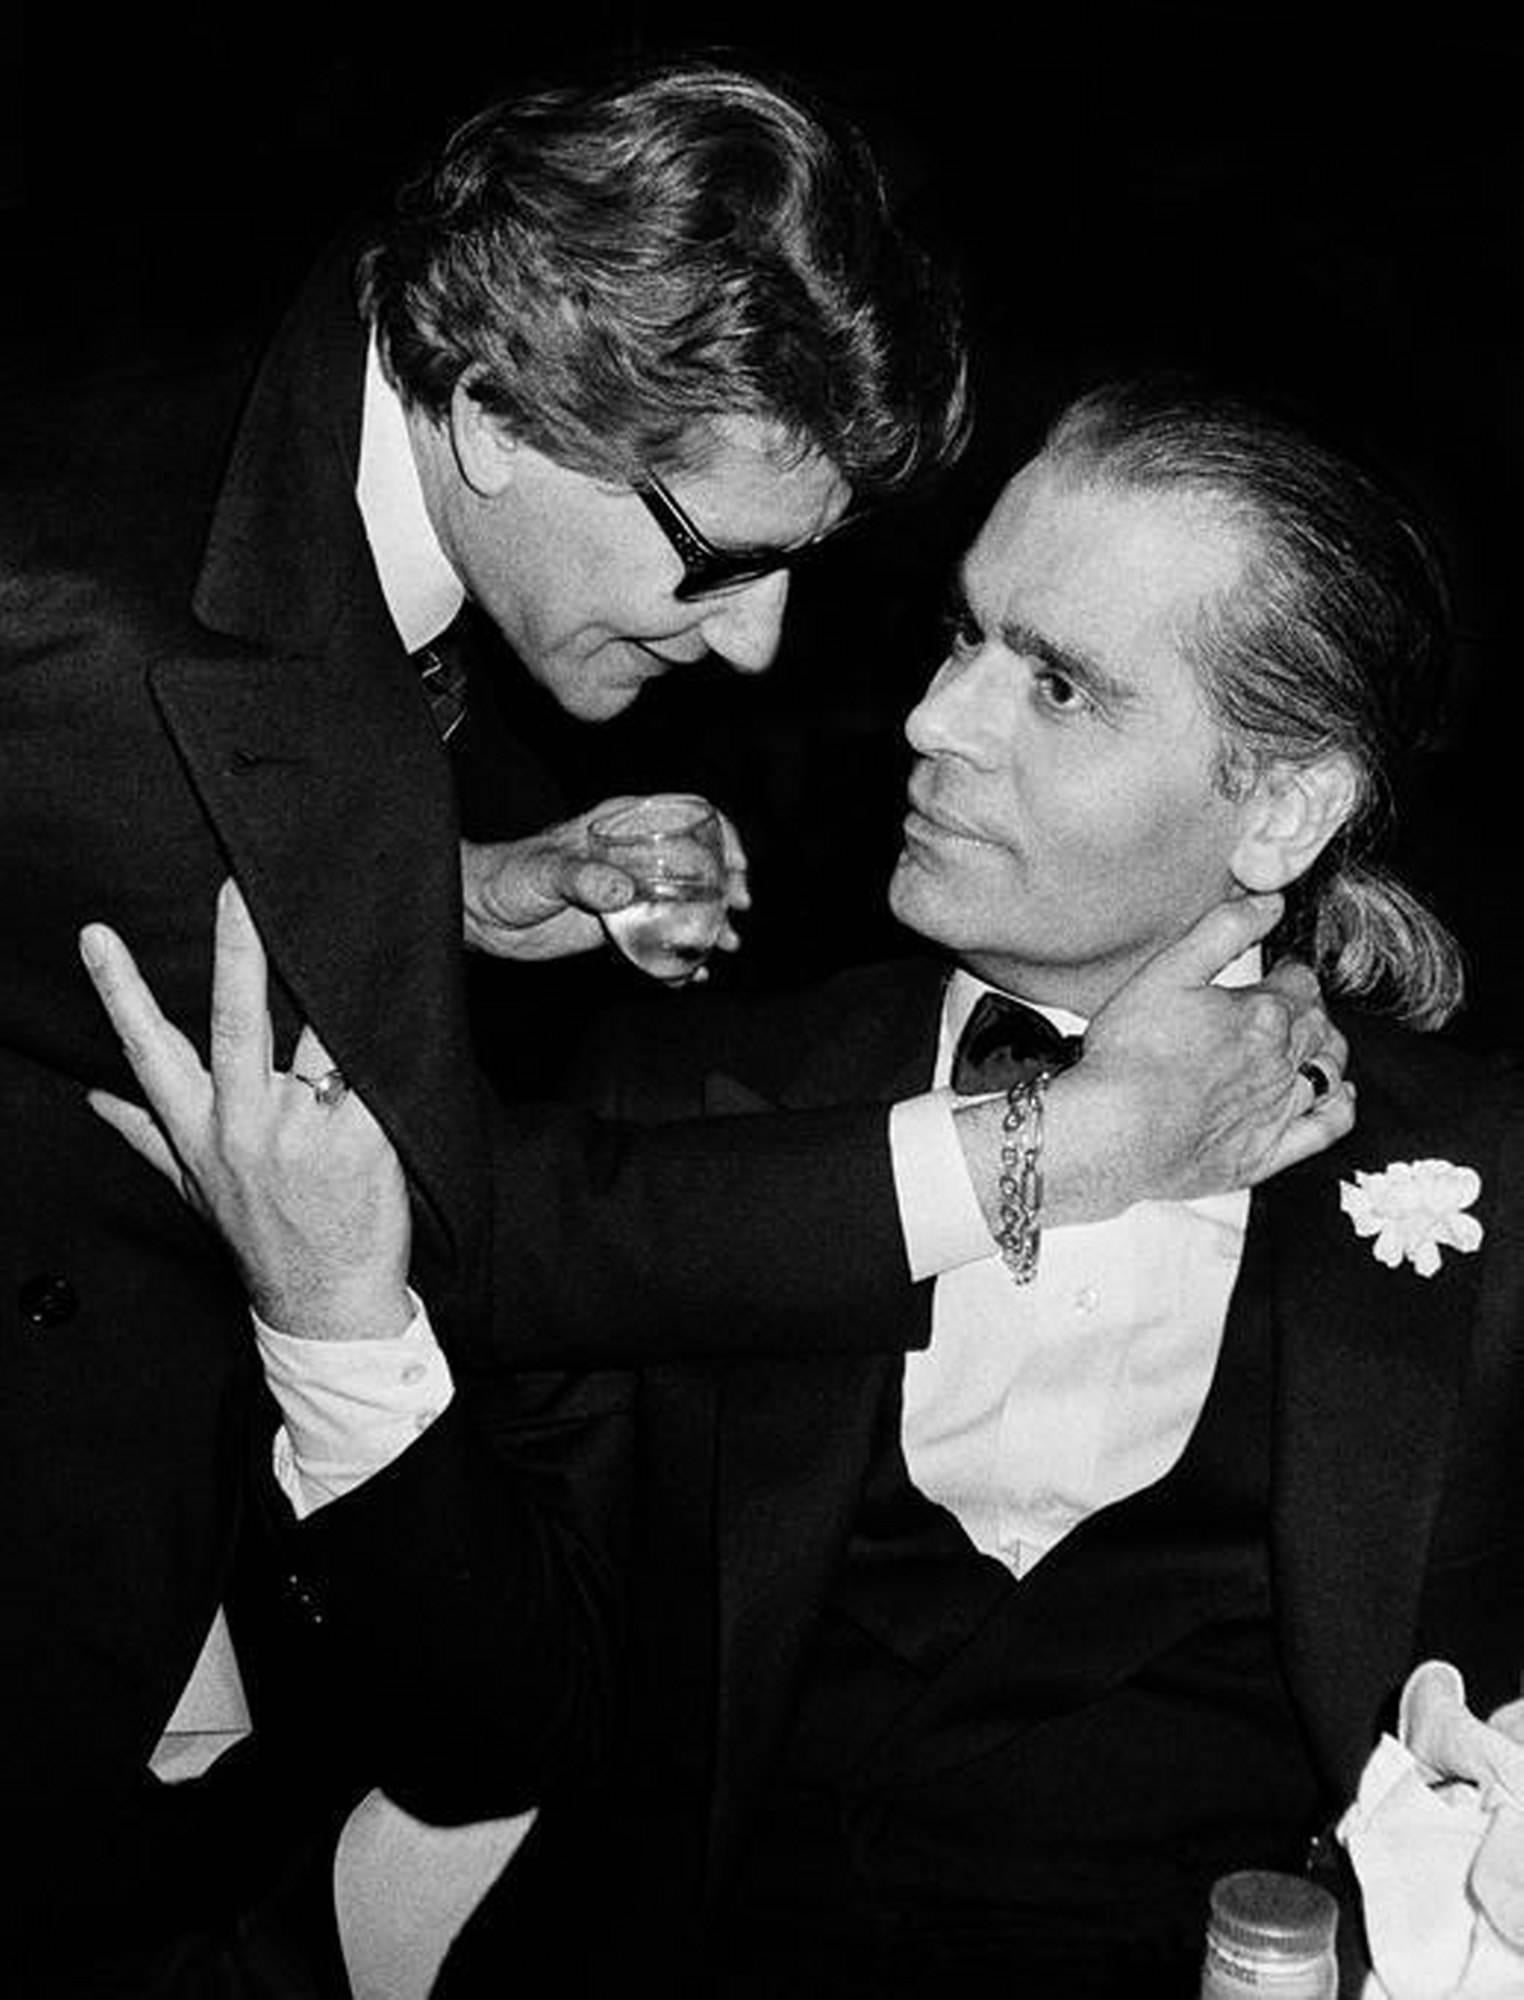 Roxanne Lowit Black and White Photograph - Yves Saint Laurent and Karl Lagerfeld -portrait of the famous fashion designers